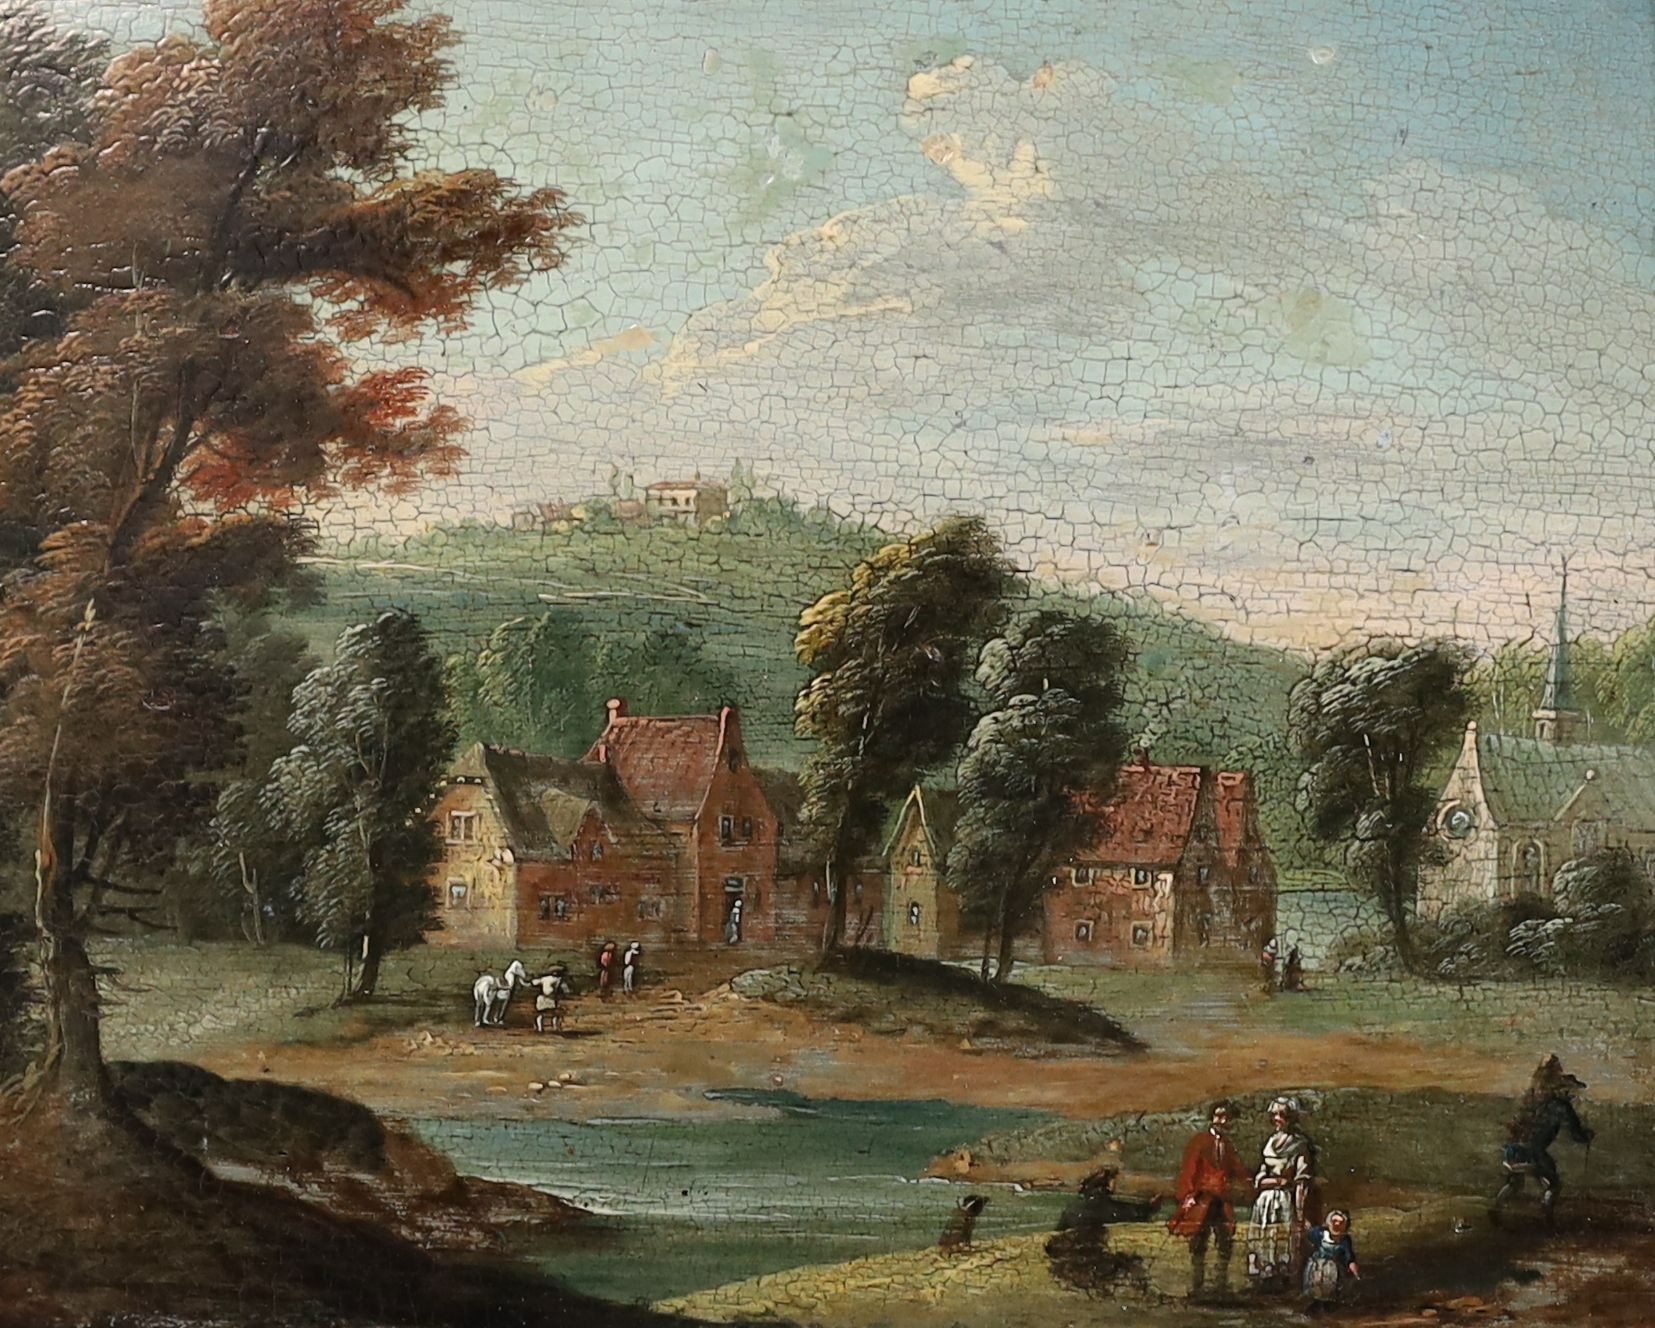 Follower of Jacob Salomonsz van Ruysdael (Dutch, 1629-1682), Figures in a landscape with houses and church beyond, oil on wooden panel, 20 x 24cm